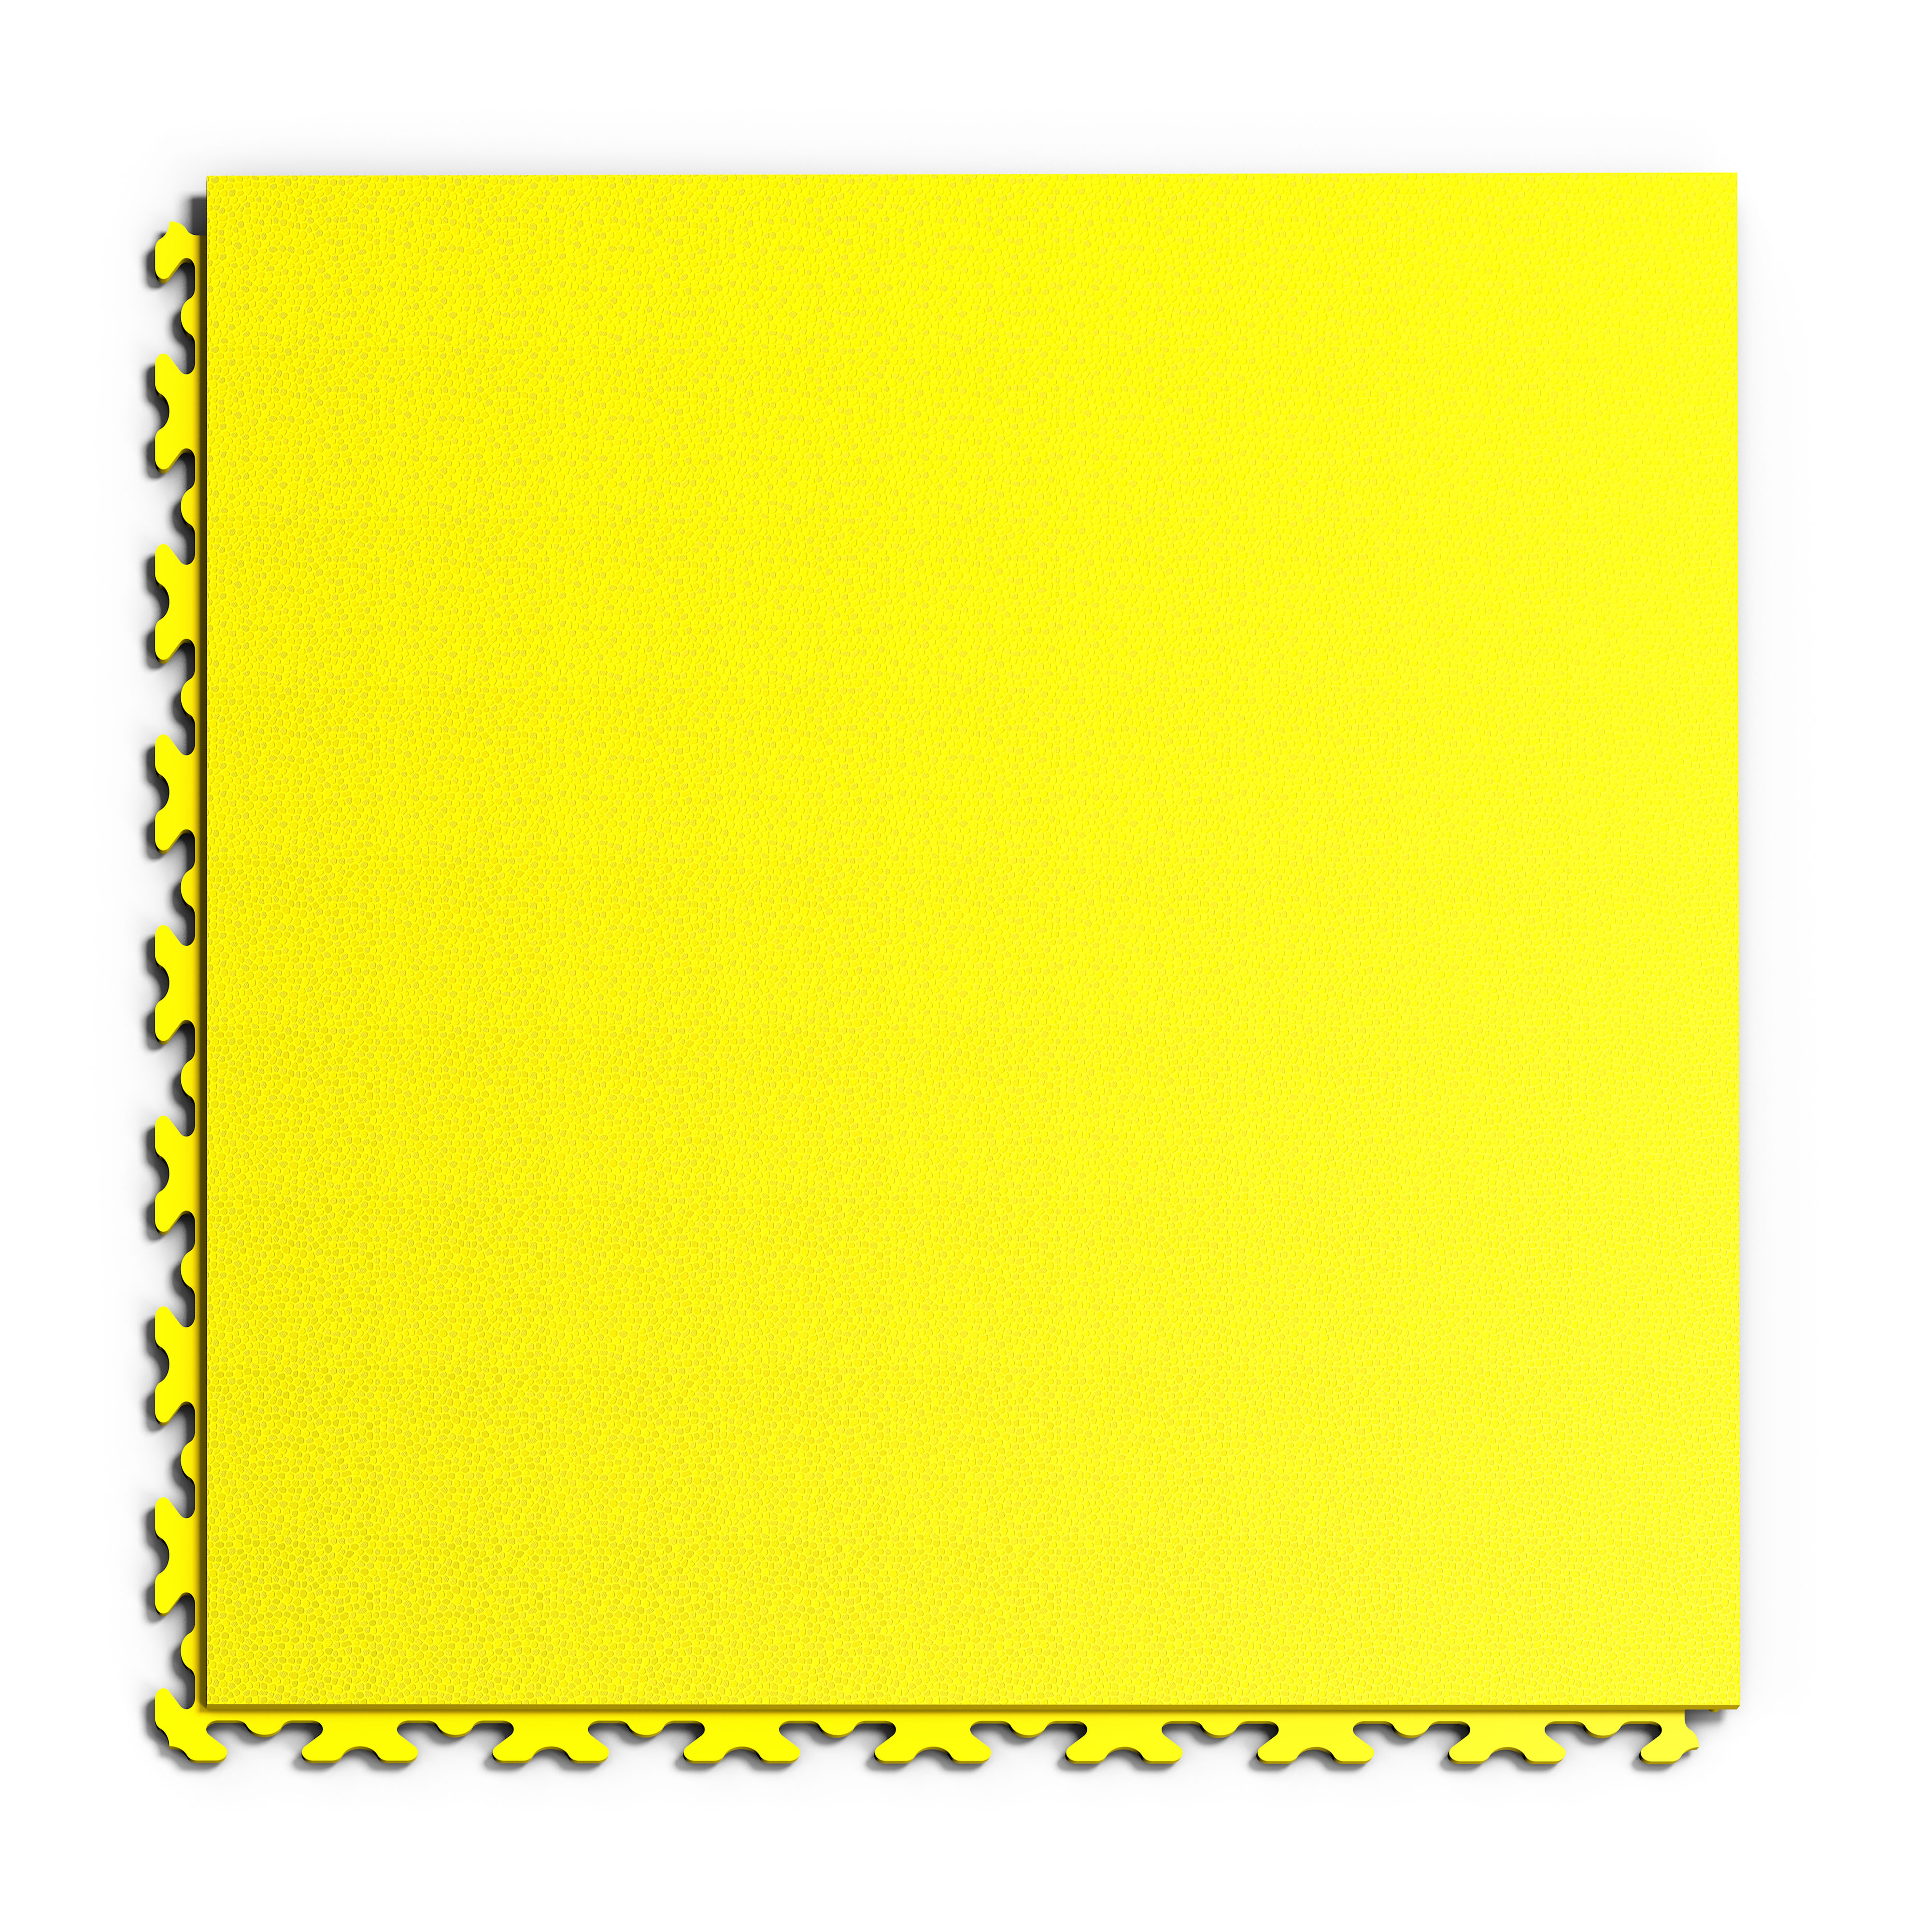 INVISIBLE Snakeskin yellow